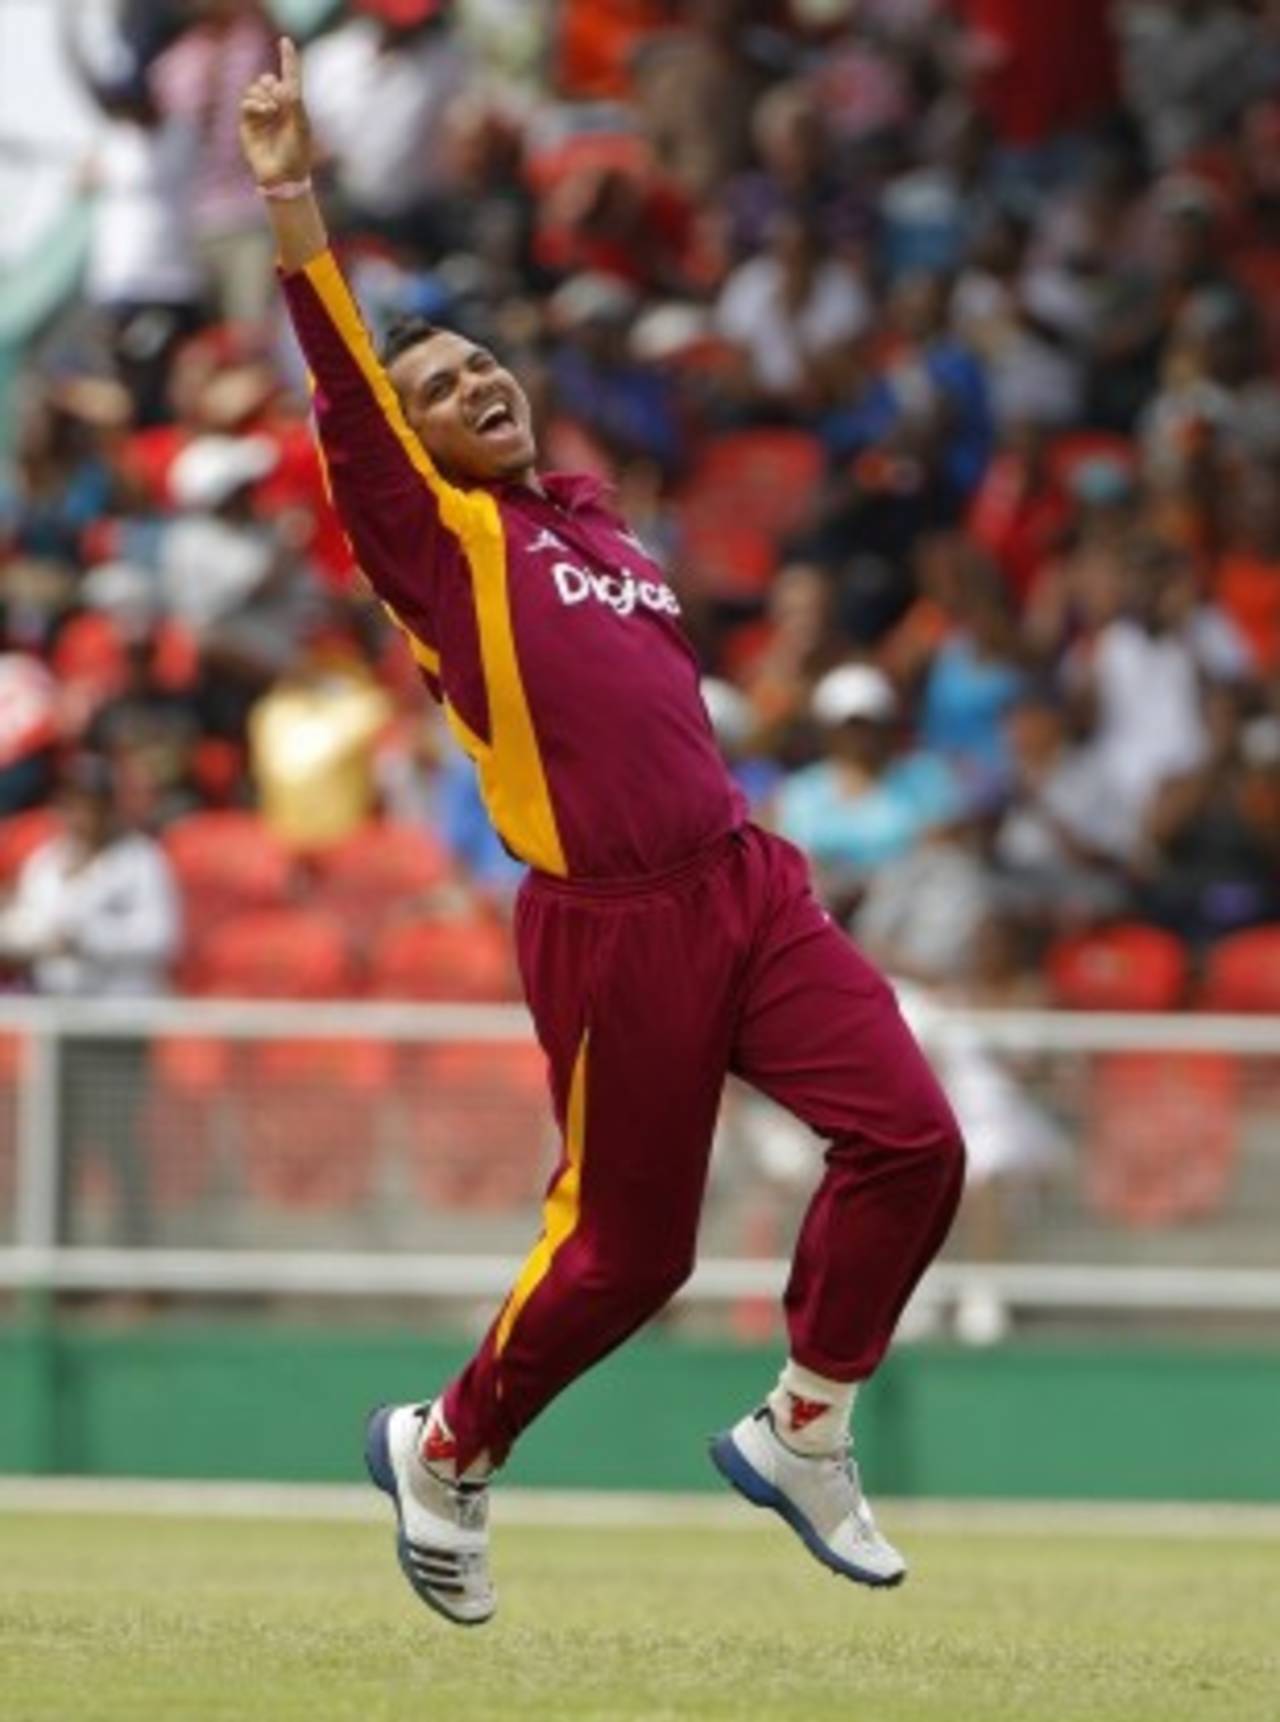 Sunil Narine has given Australia a hard time in the ODIs, but could be in doubt for the Tests due to his IPL commitments&nbsp;&nbsp;&bull;&nbsp;&nbsp;Associated Press